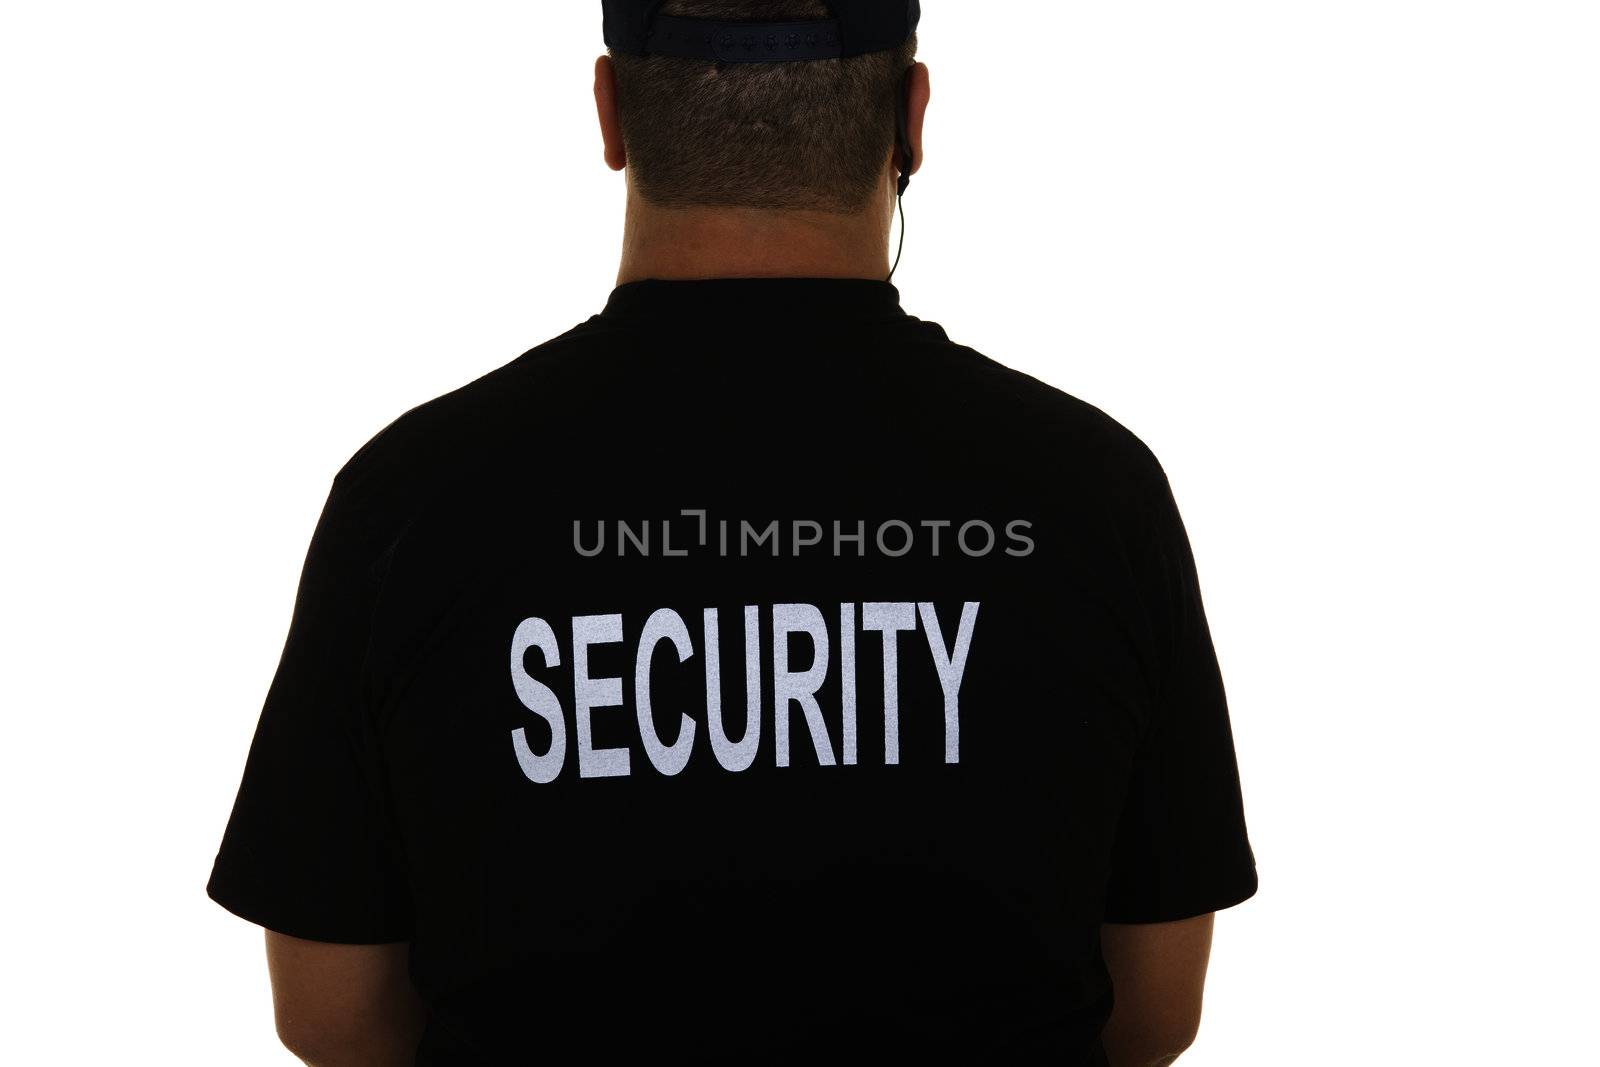 back of a security guard isolated on white